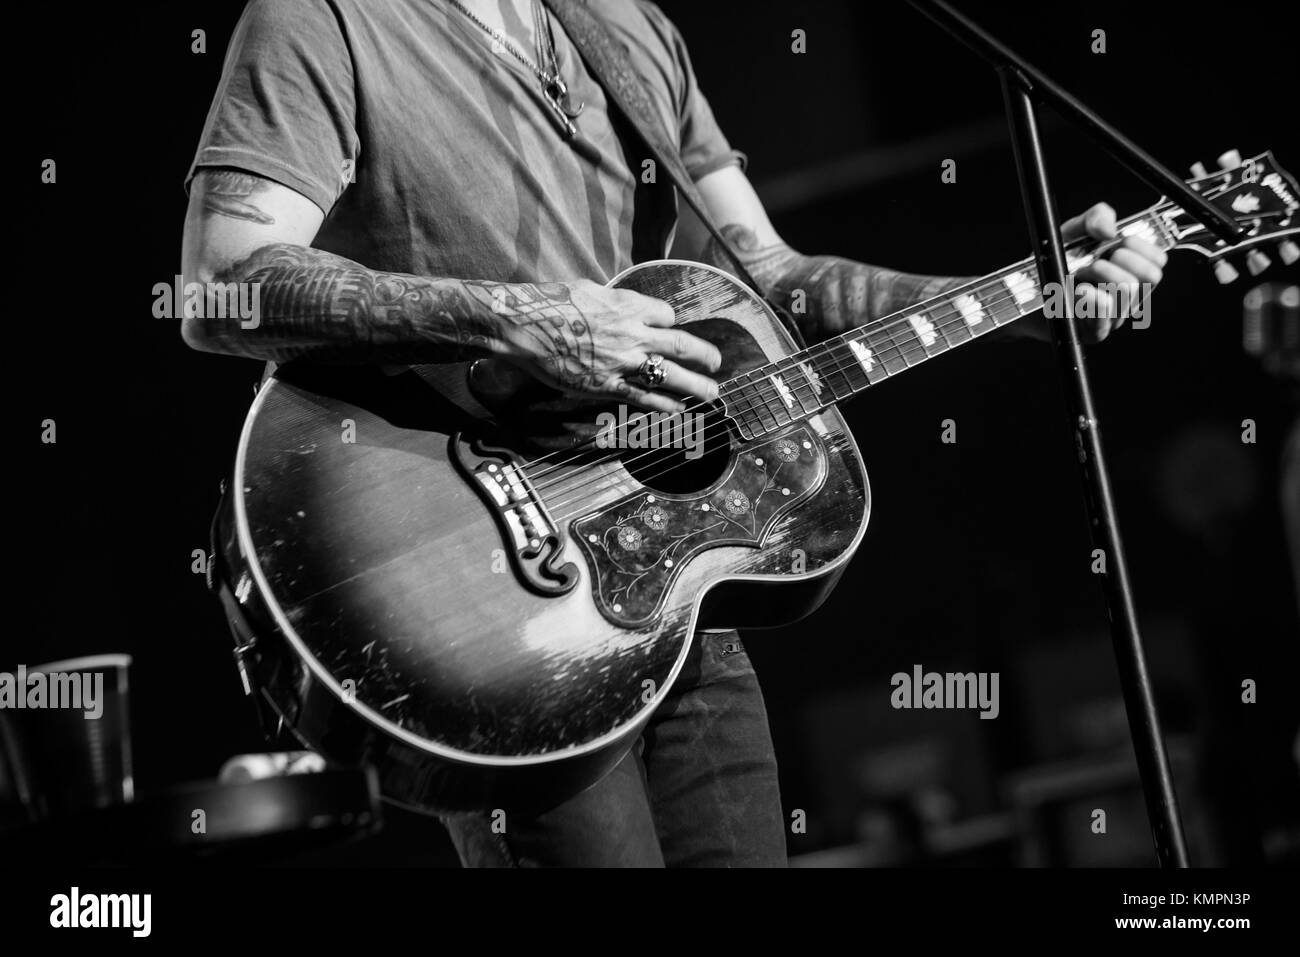 Las Vegas, NV, USA. 8th Dec, 2017. ***HOUSE COVERAGE*** Gary Allen at The Joint at Hard Rock Hotel & Casino in Las vegas, NV on December 8, 2017. Credit: Gdp Photos/Mediapunch/Alamy Live News Stock Photo